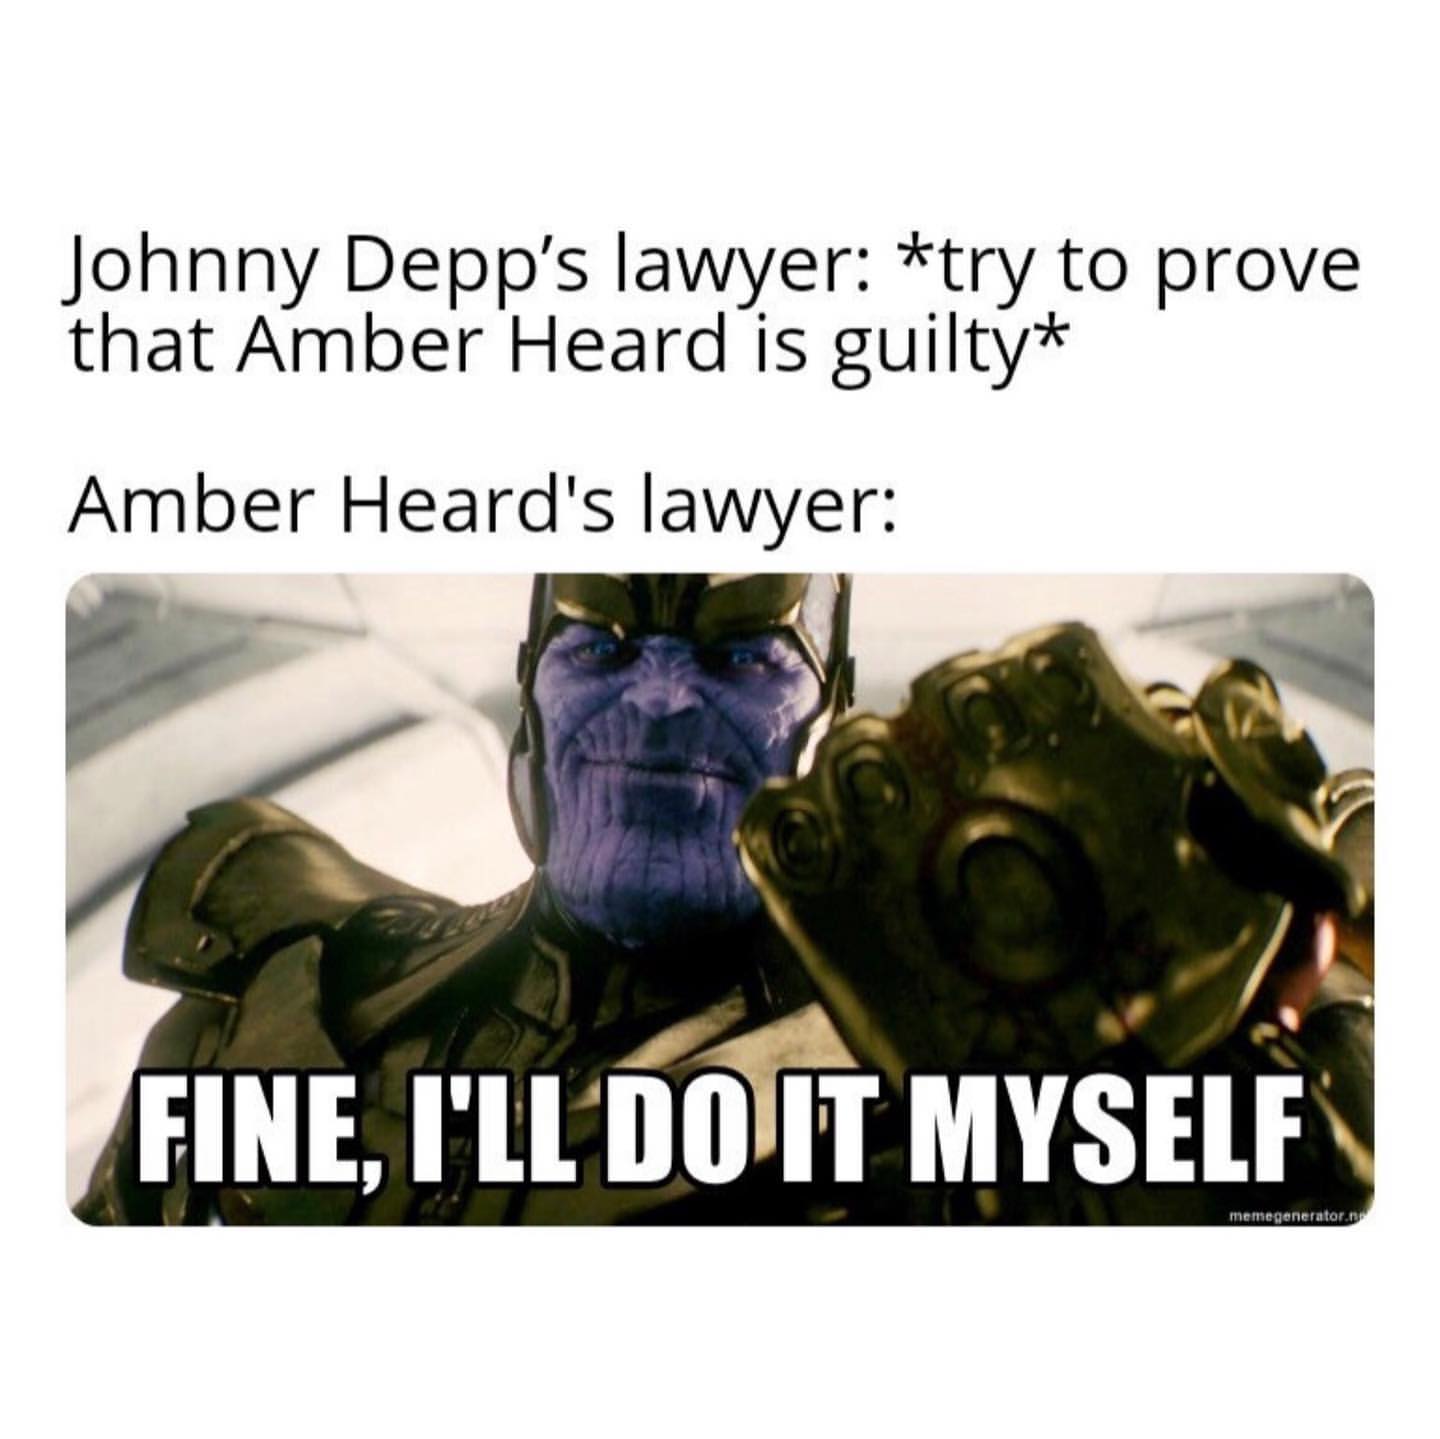 Johnny Depp's lawyer: *Try to prove that Amber Heard is guilty* Amber Heard's lawyer: FIine, I'll do it myself.